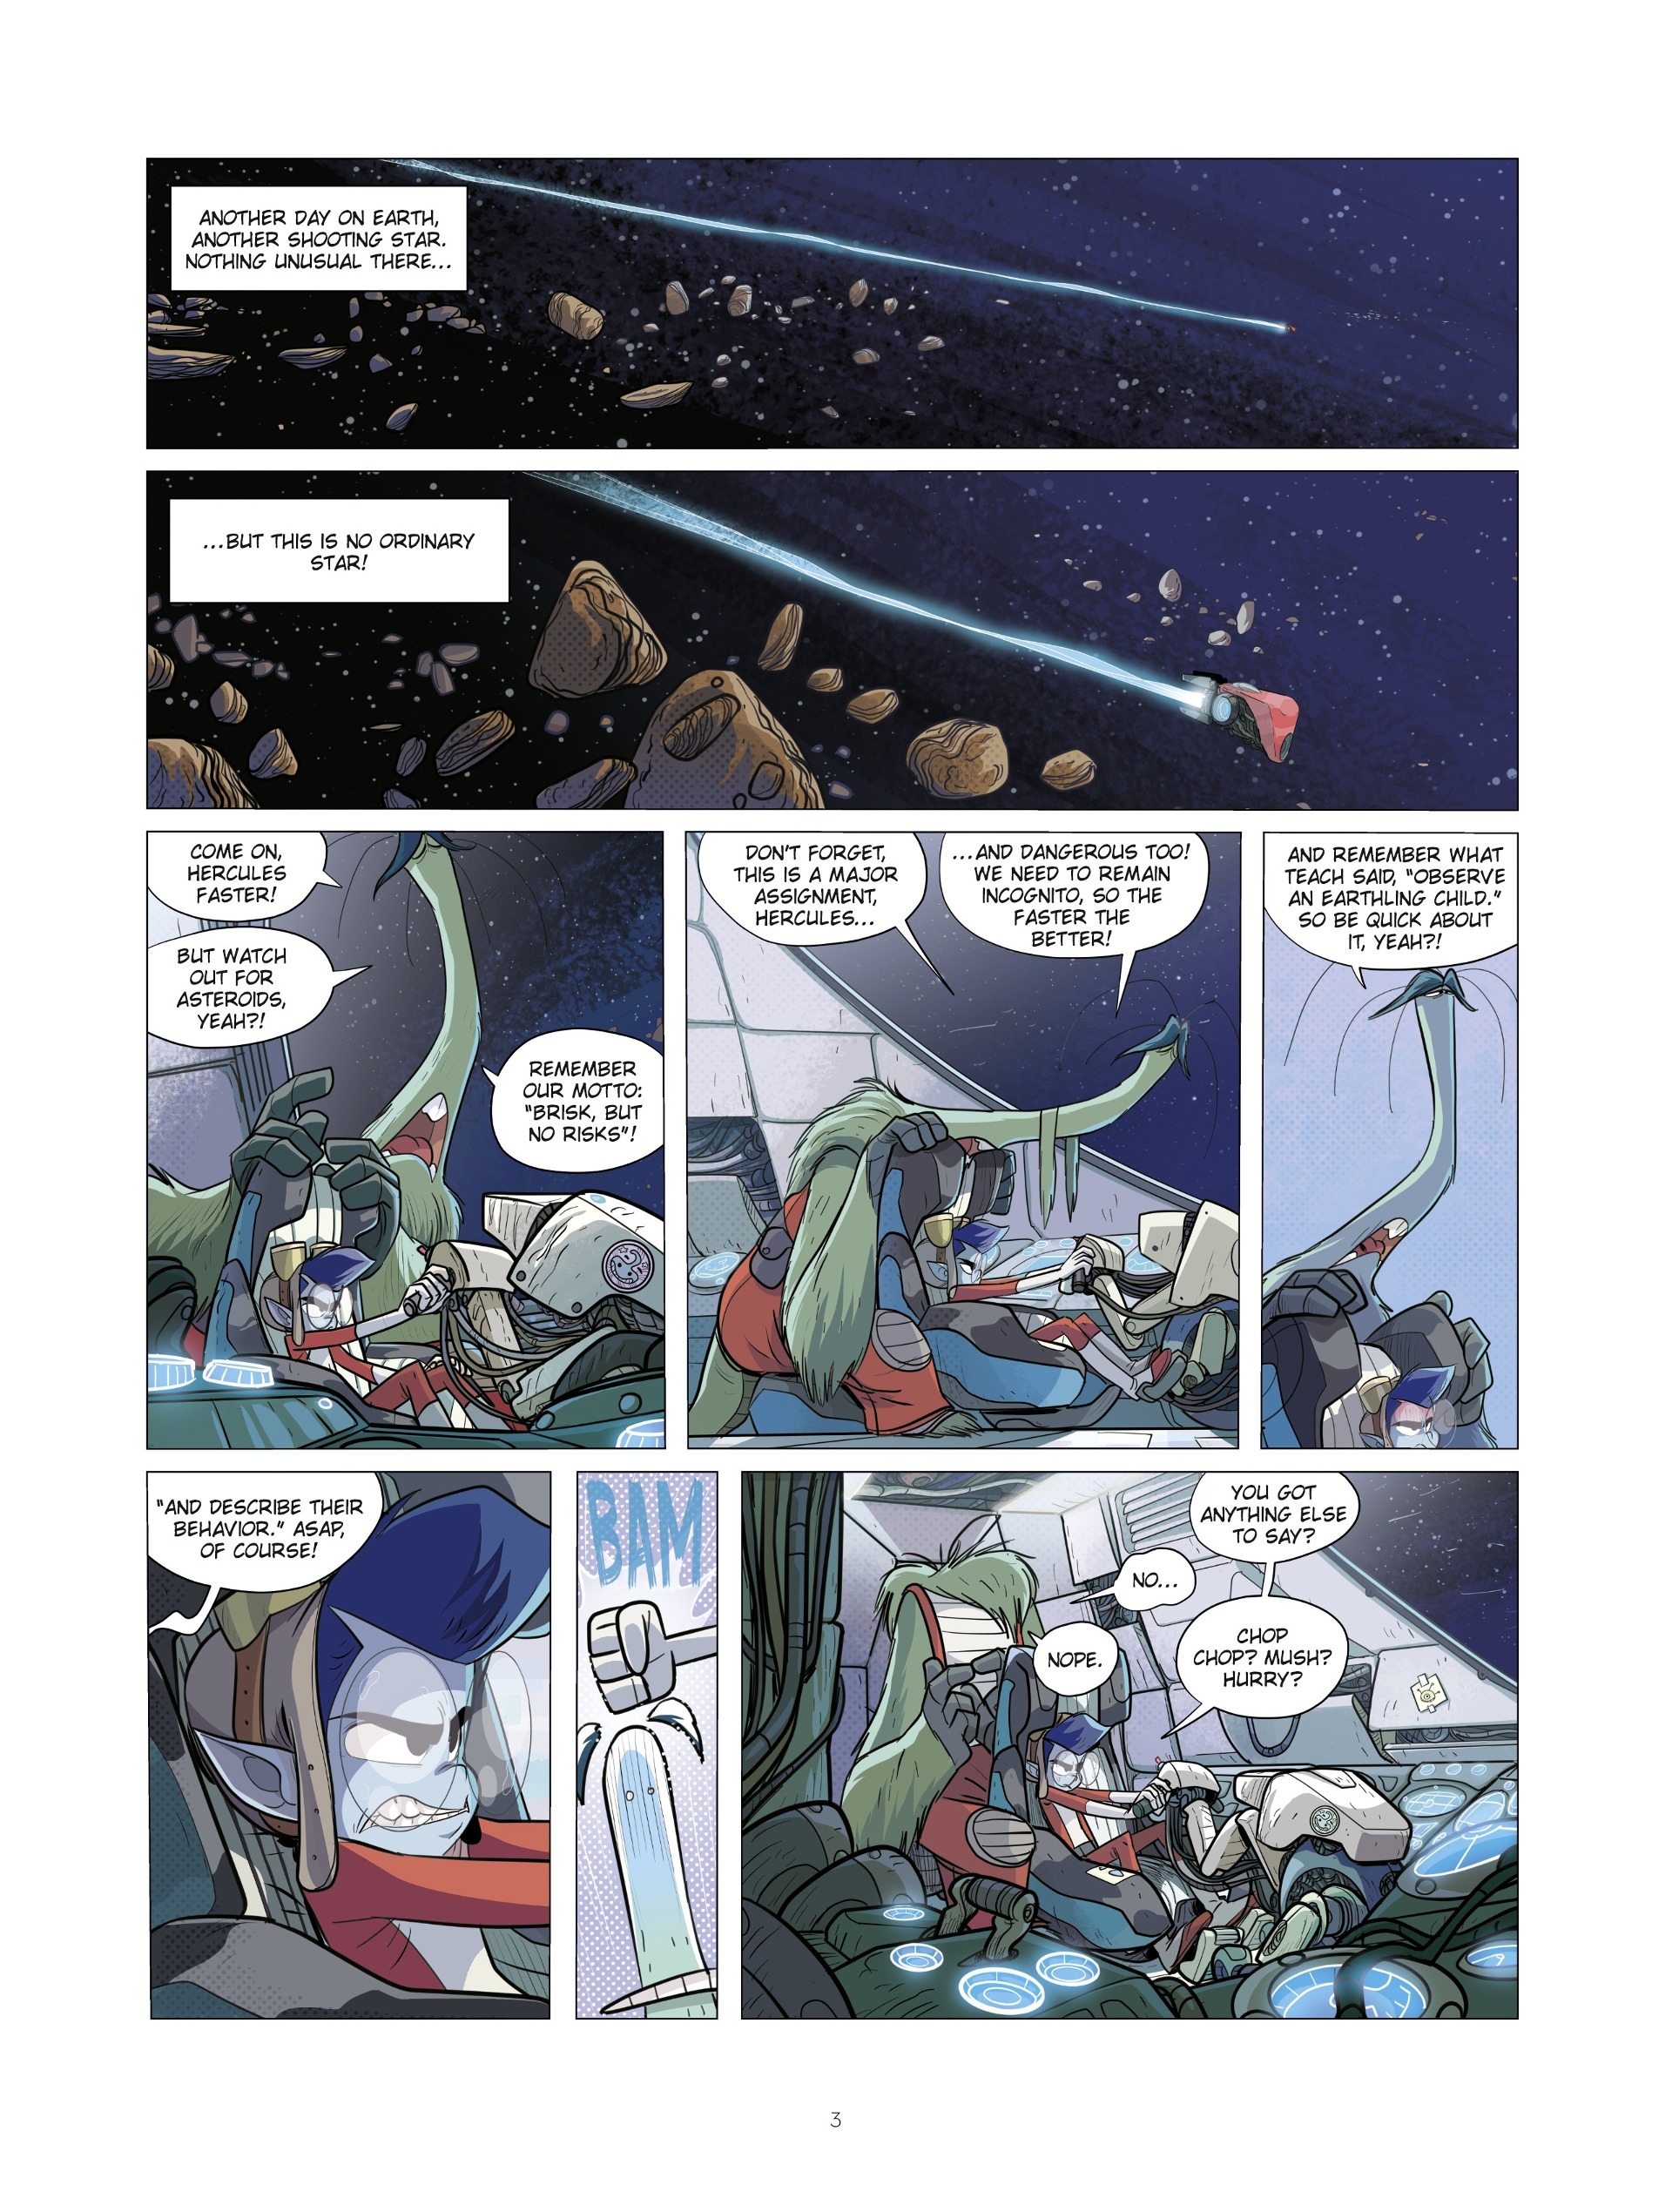 Hercules Intergalactic Agent (2019-): Chapter 1 - Page 3